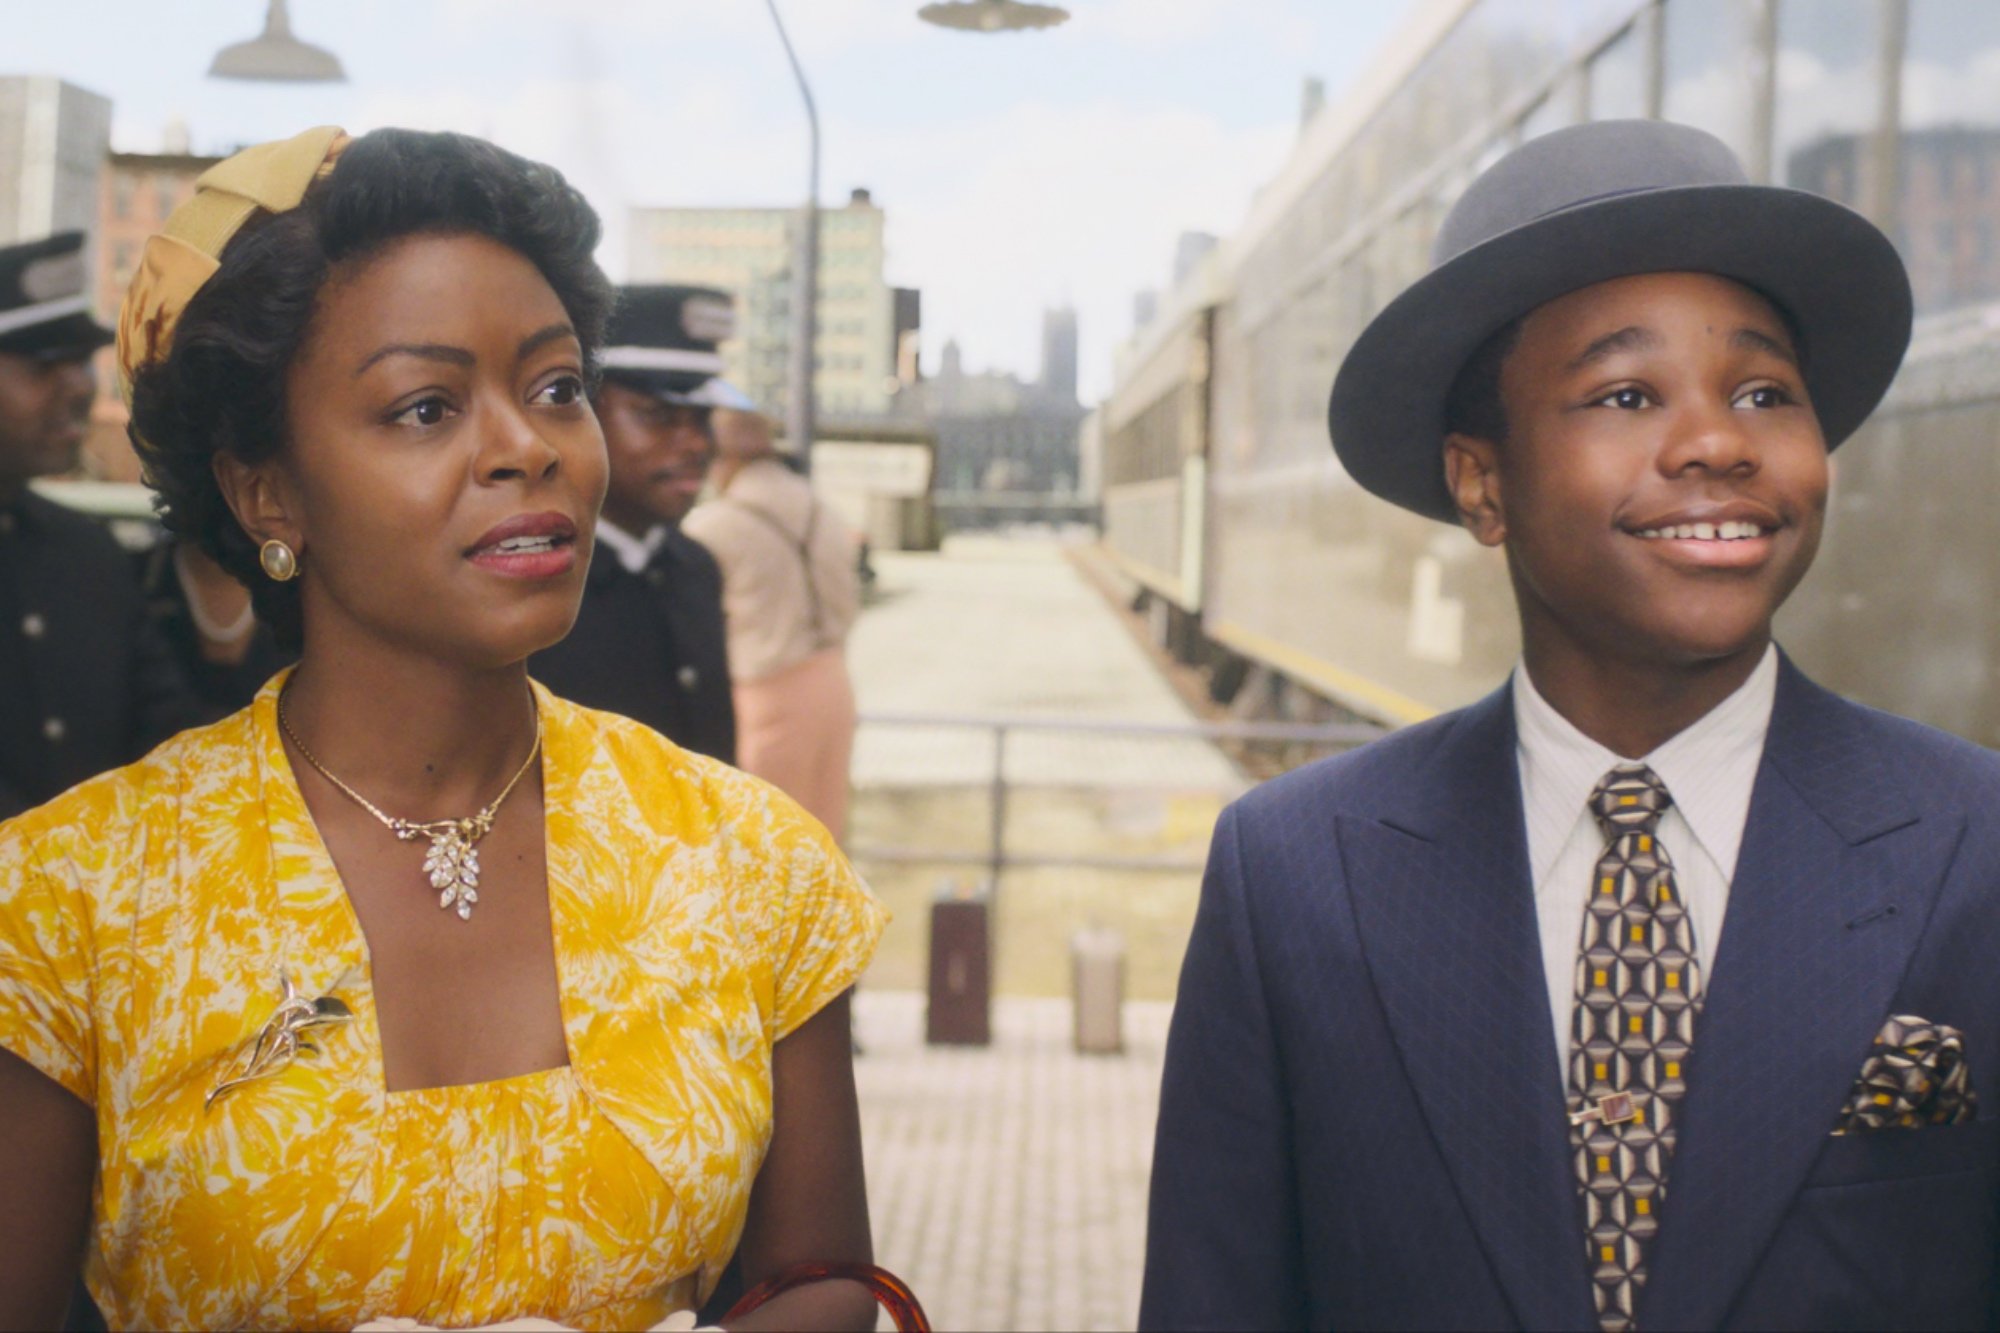 'Till' Danielle Deadwyler as Mamie Till-Mobley and Jalyn Hall as Emmett Till. Deadwyler is wearing a yellow and white dress and Hall is wearing a suit, tie, and a hat. They're standing outside of a train at the train station.